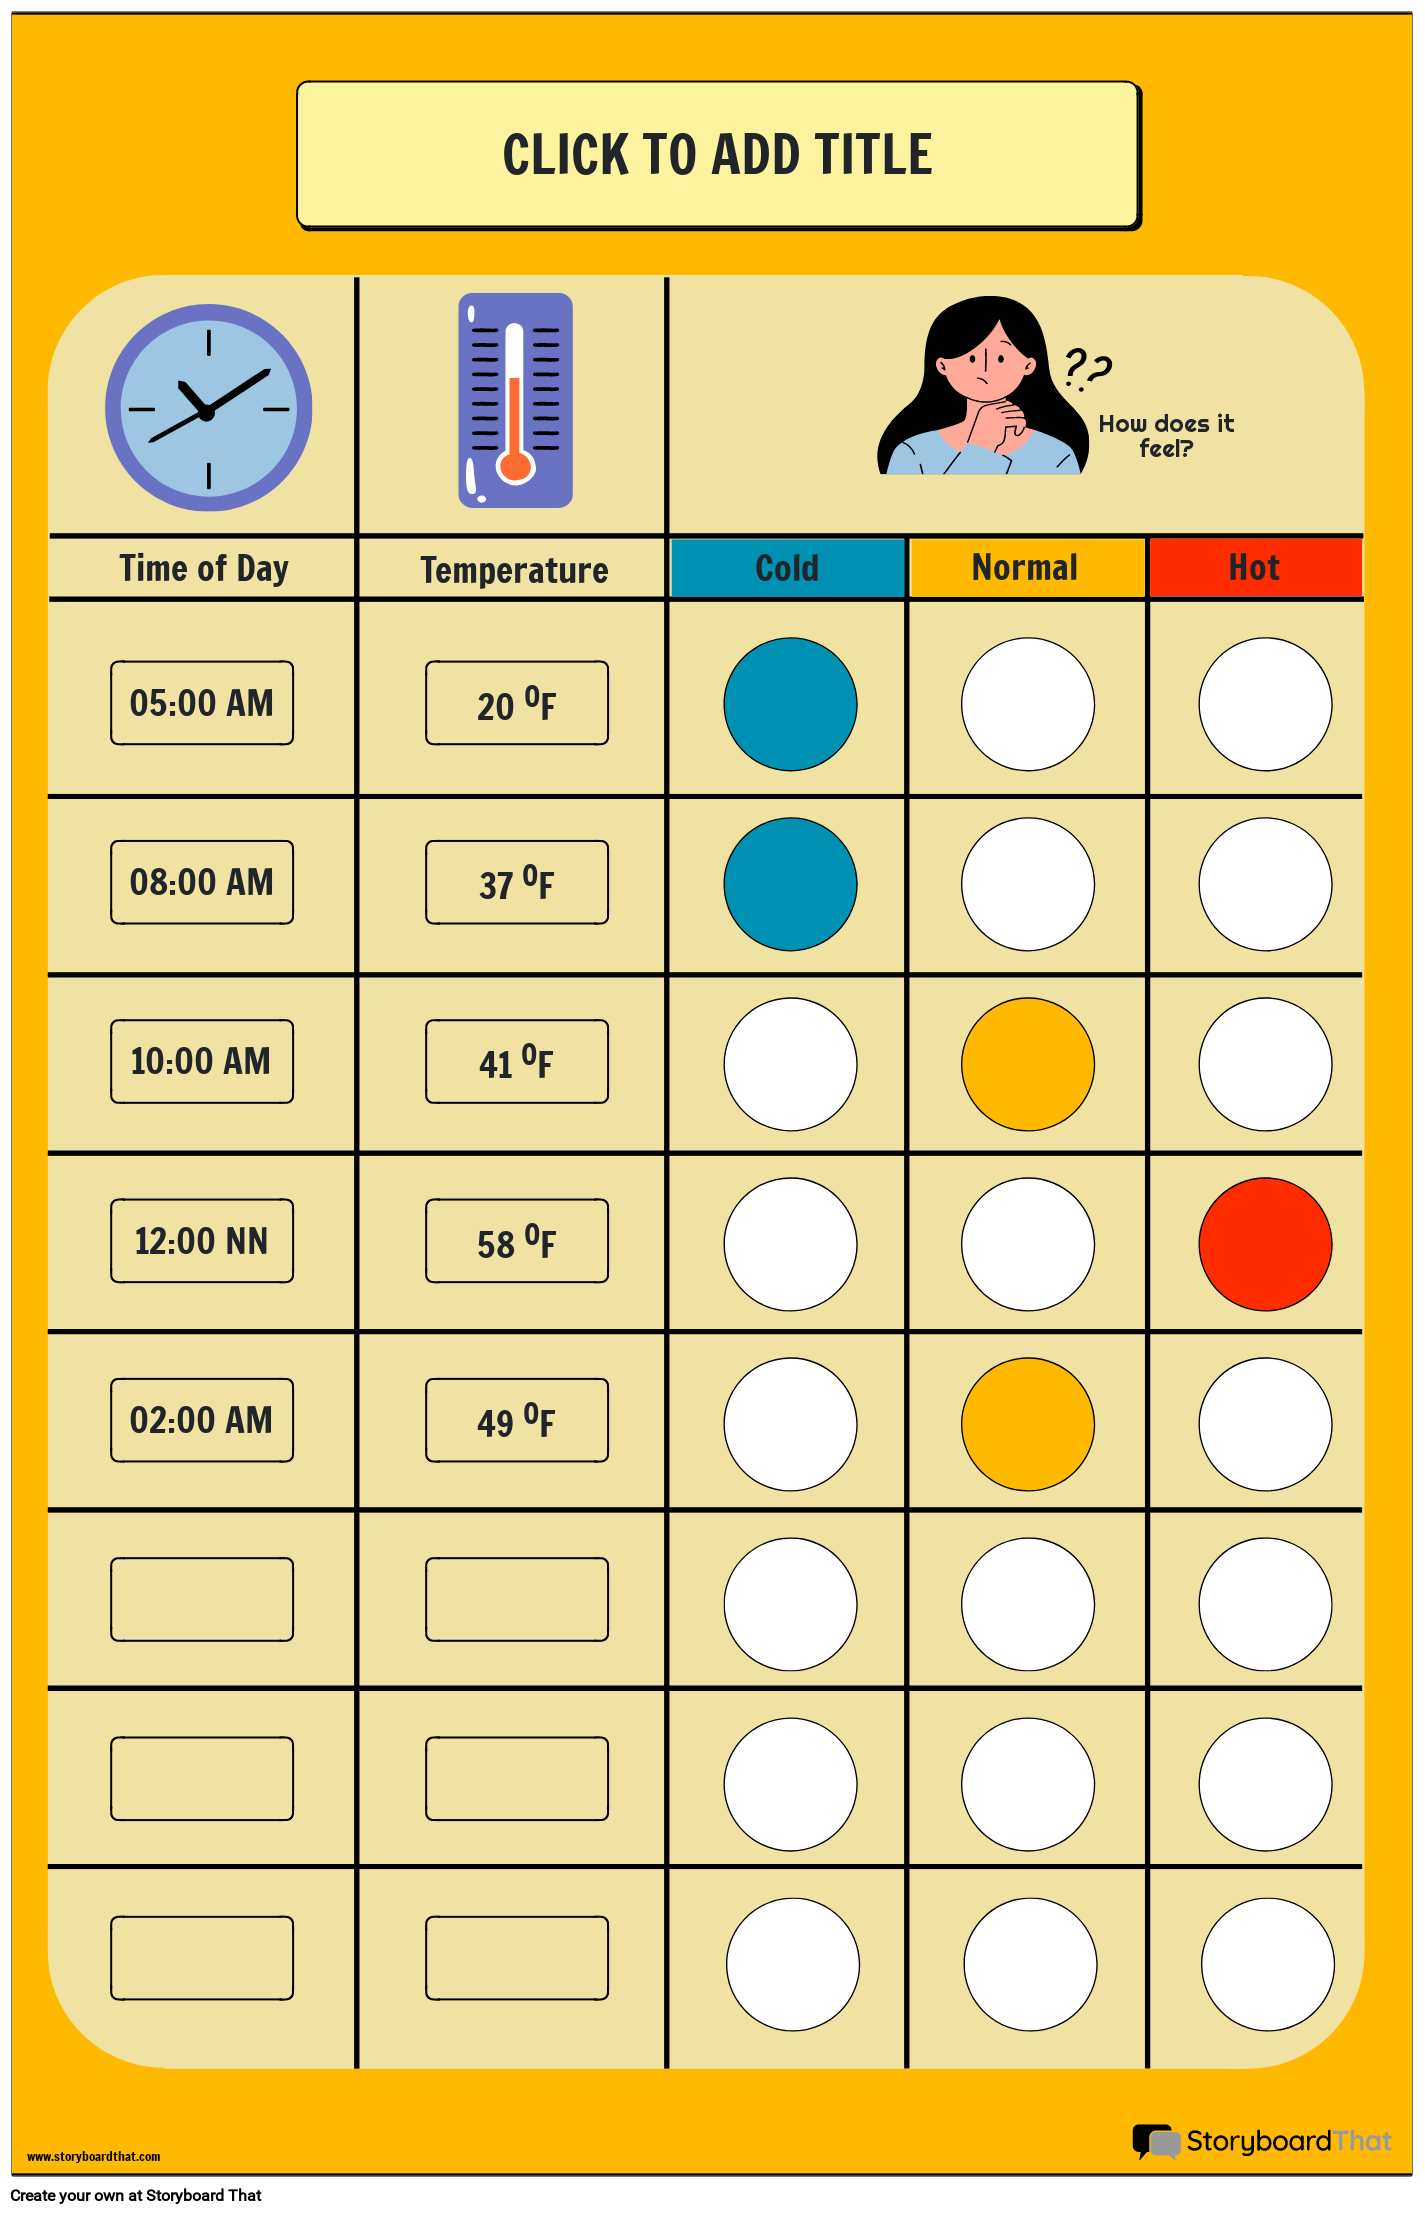 UNITS OF MEASUREMENT - TEMPERATURE TRACKER POSTER WITH TIME OF DAY